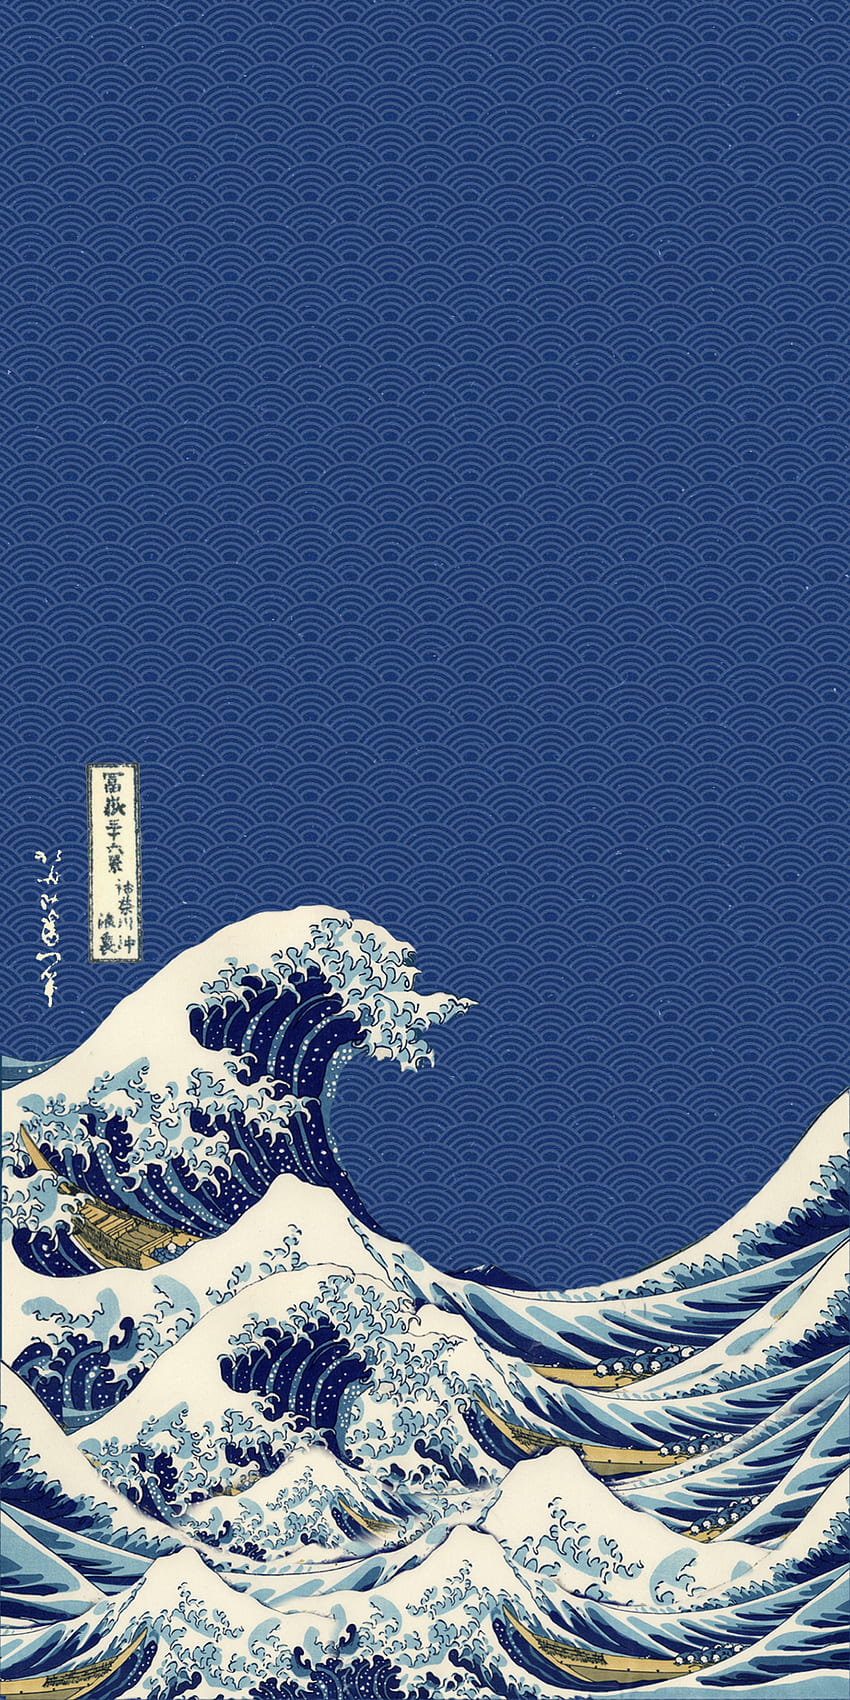 Great wave of kanagawa think you guys could find me a similar to this. Waves iphone, Japanese iphone, Vaporwave, Aesthetic Kanagawa HD phone wallpaper